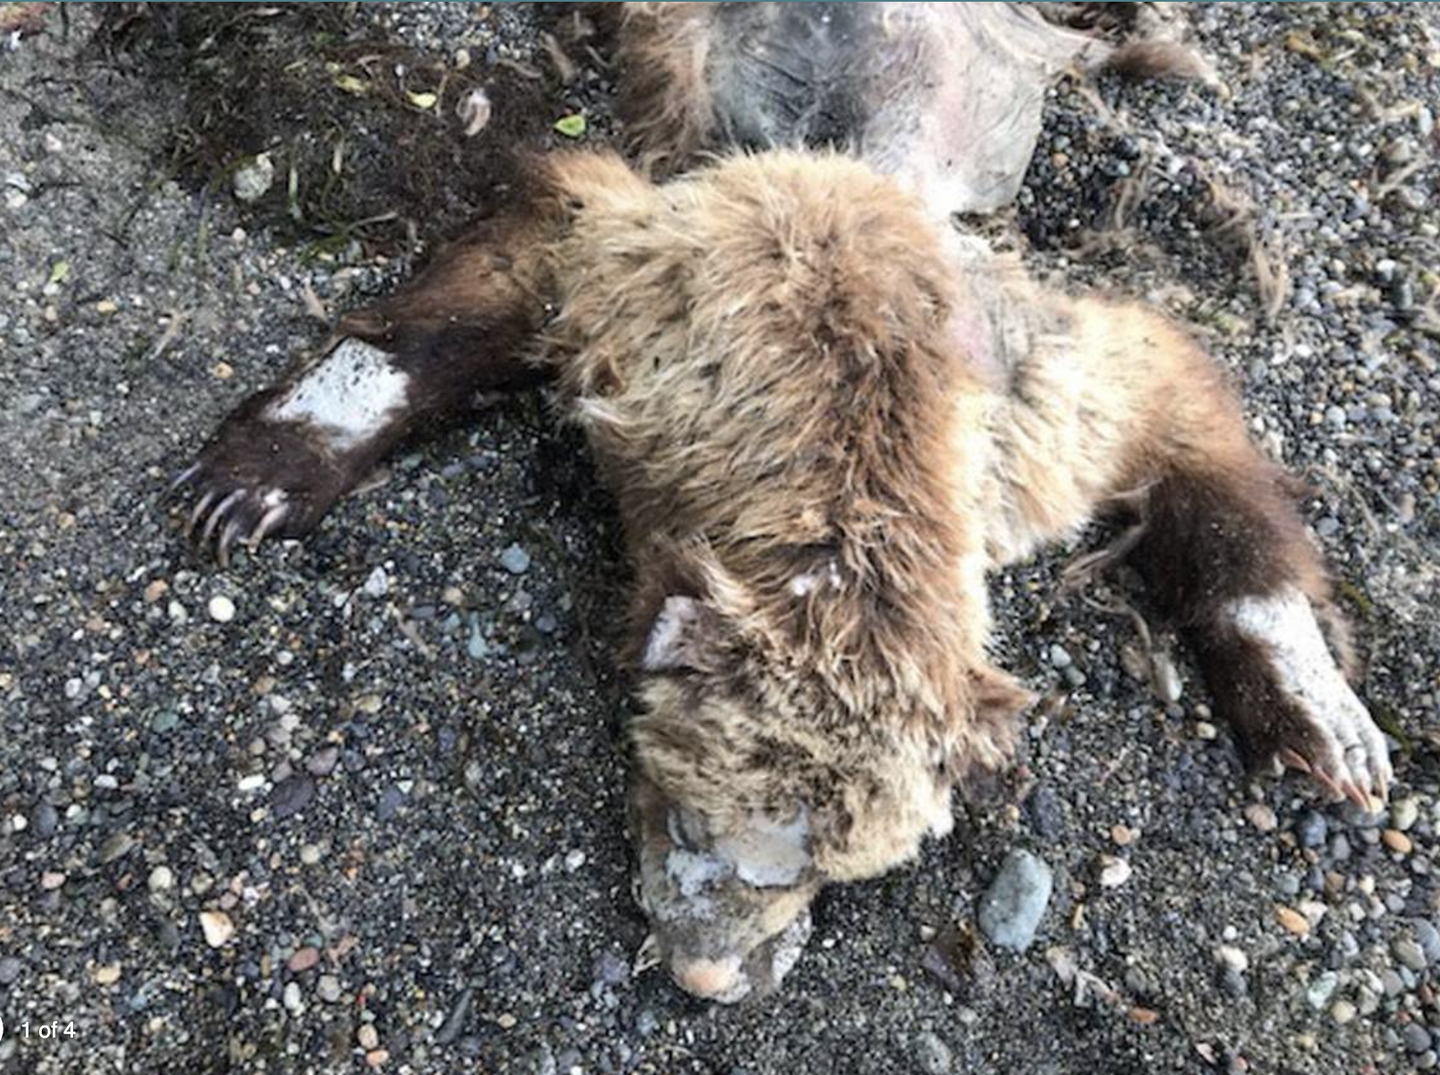 A grizzly bear mysteriously washed ashore on a Washington State beach